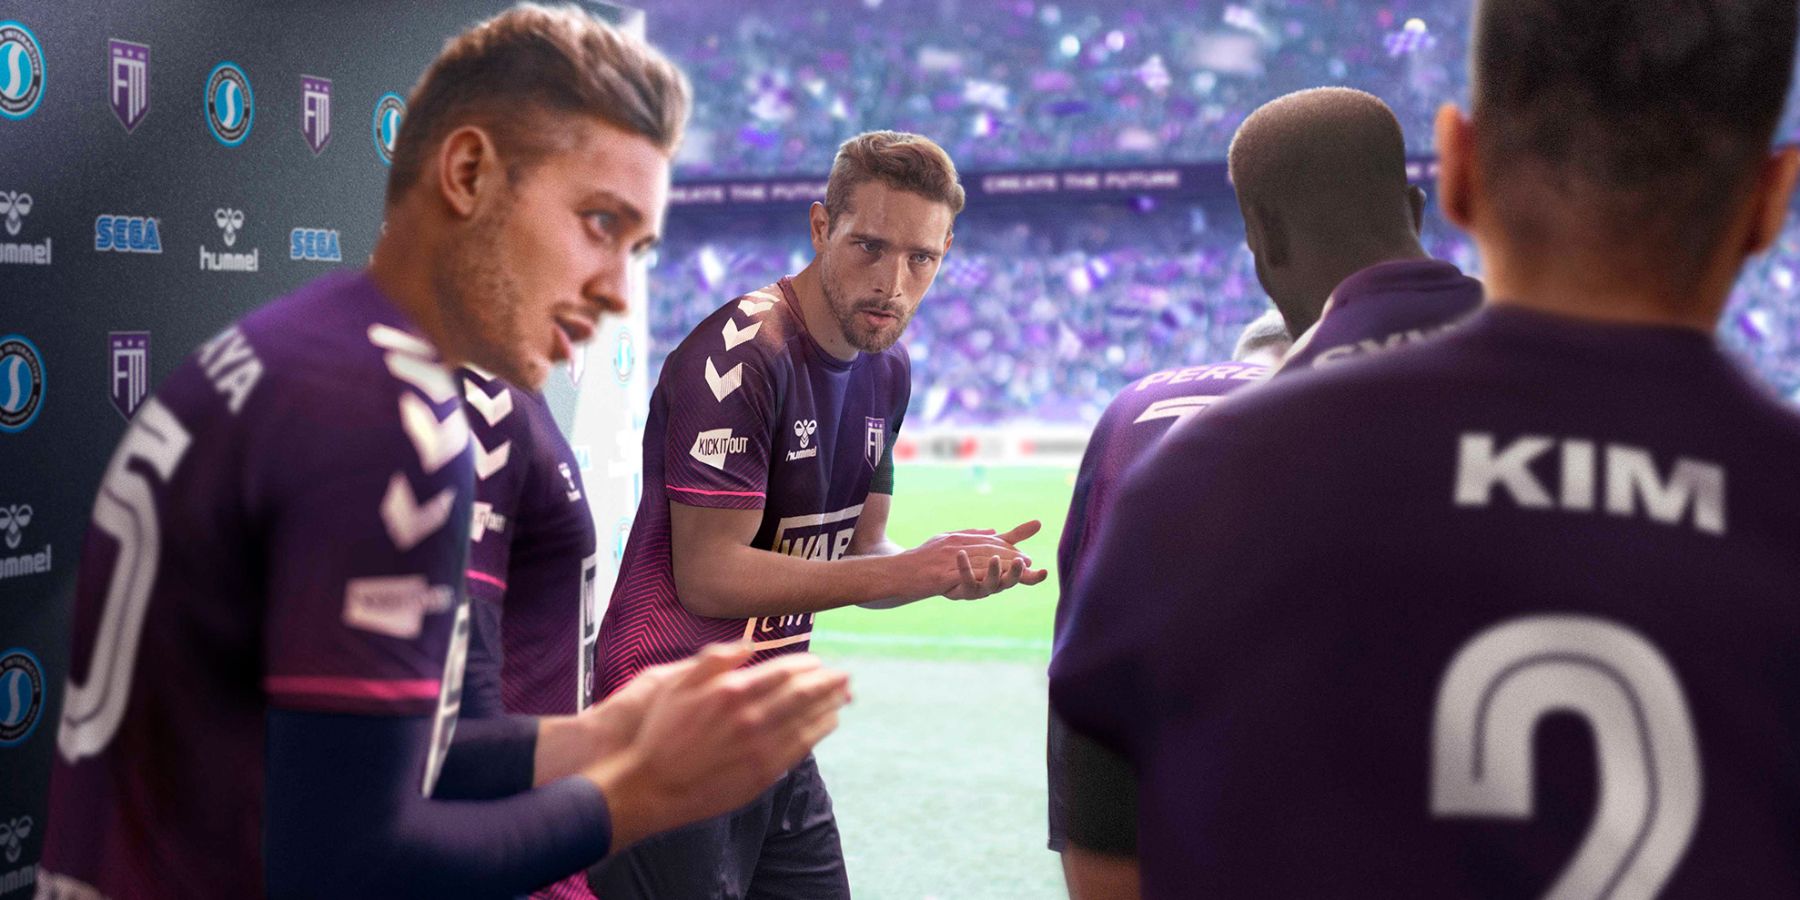 Football Manager's immersive realism shows a more interesting future for the sports game genre.